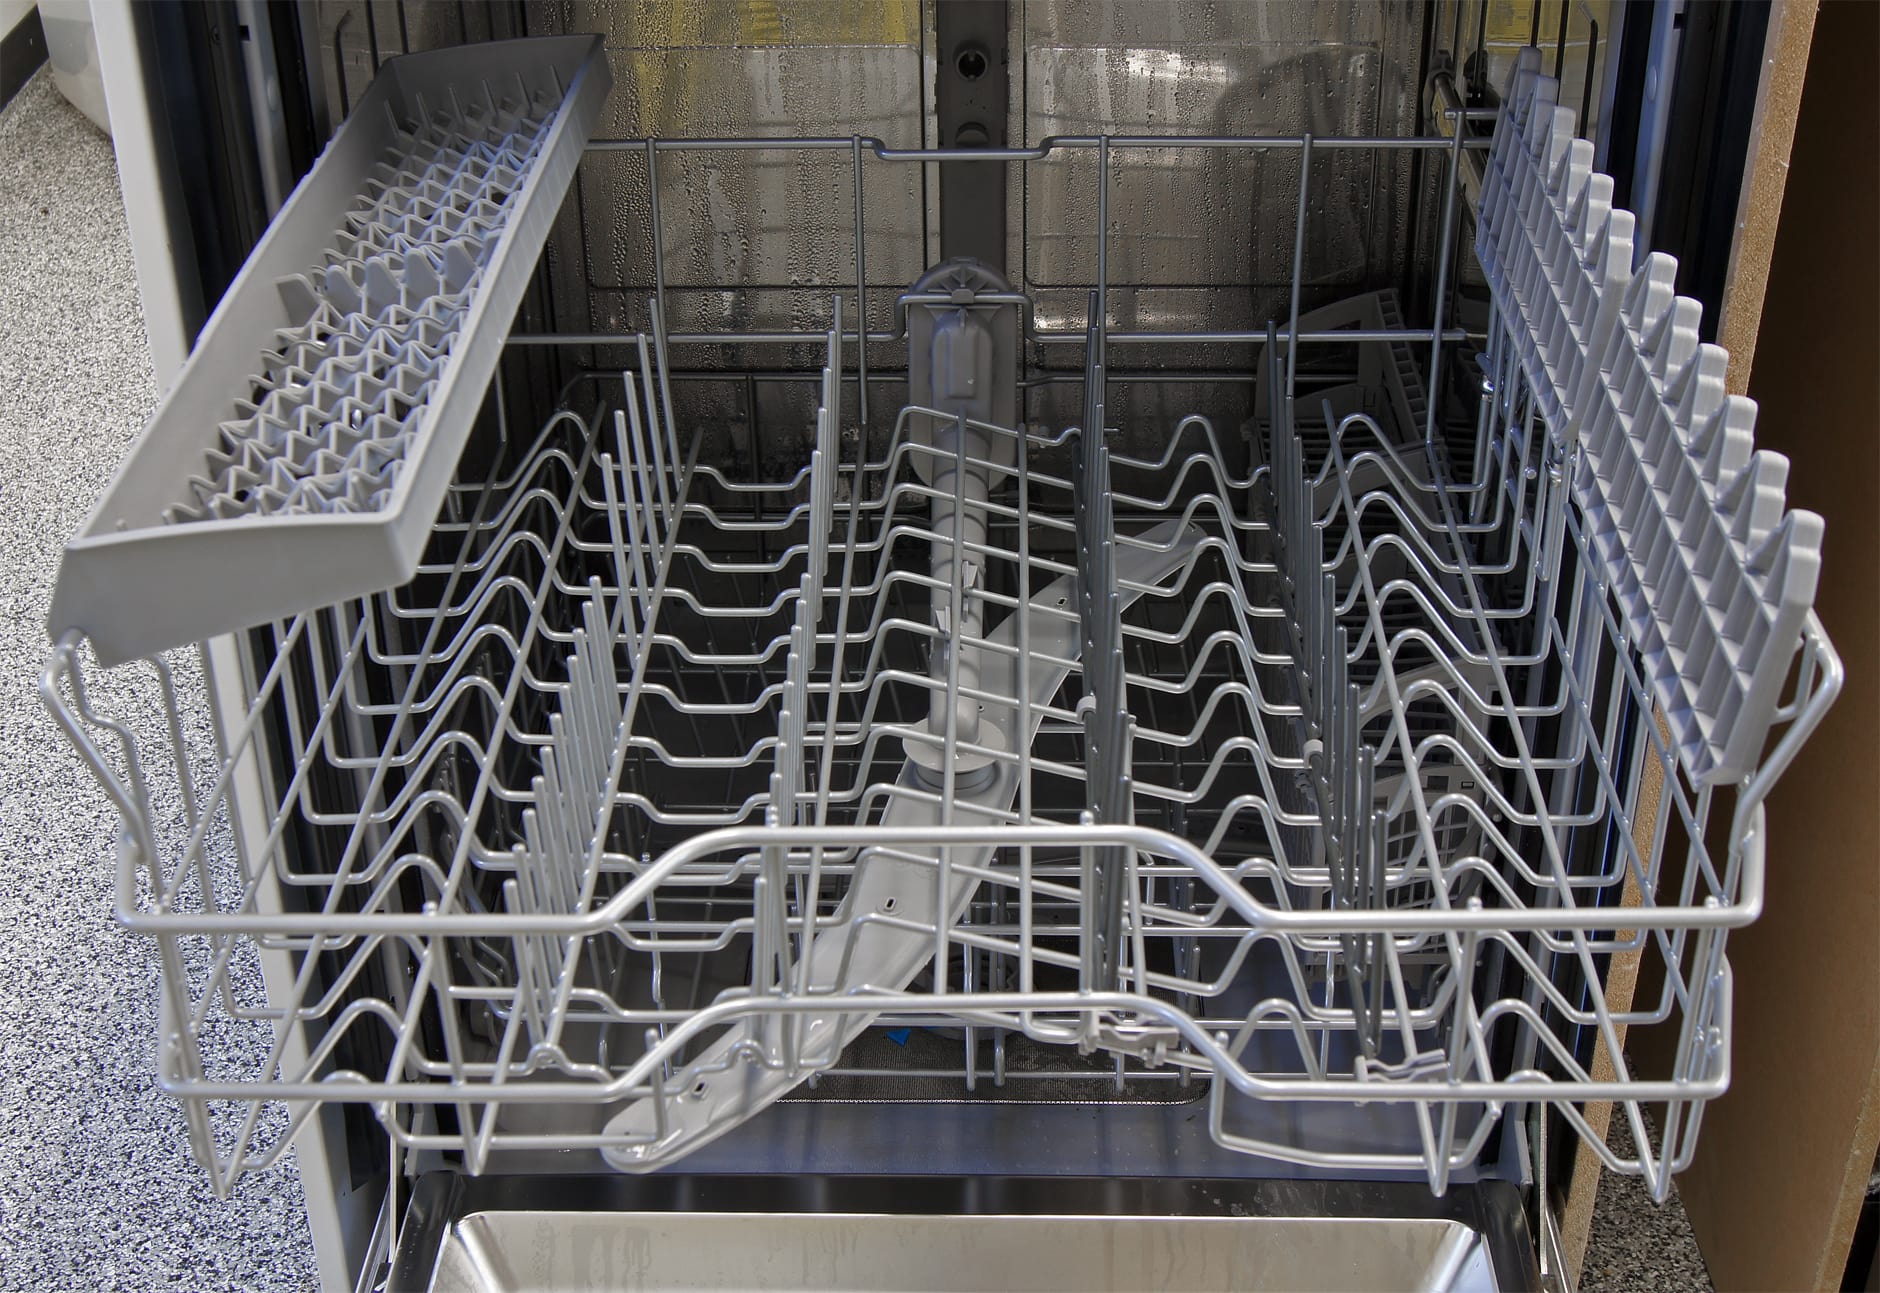 Bosch Ascenta SHX4AT75UC Dishwasher Review - Reviewed.com Dishwashers Stainless Steel Dishwasher Rack Replacement